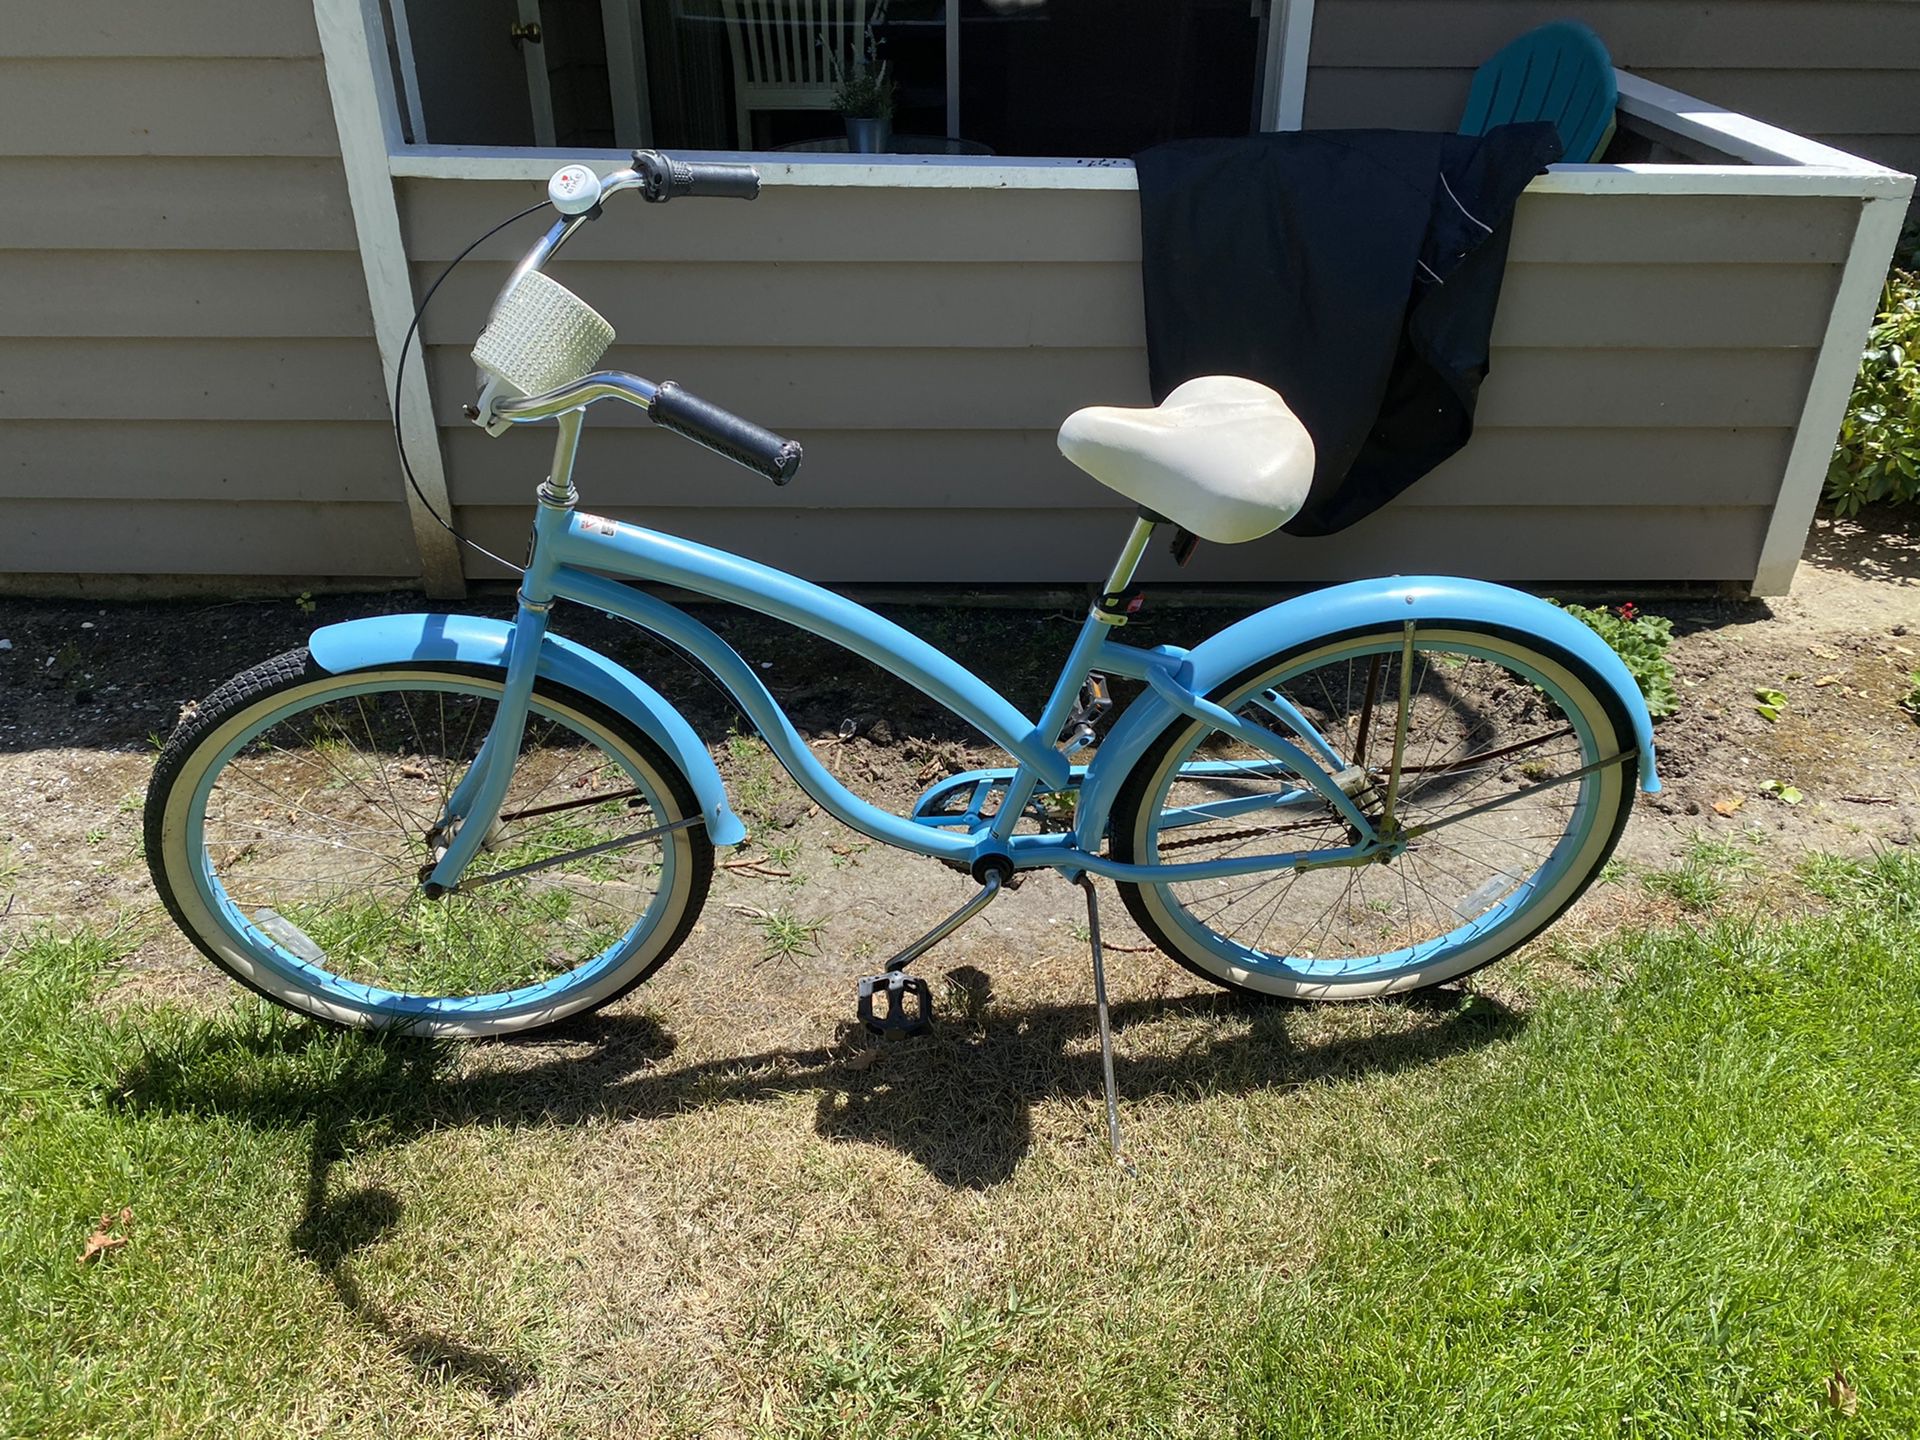 Beach Cruiser Bike Great Condition With a Little TLC